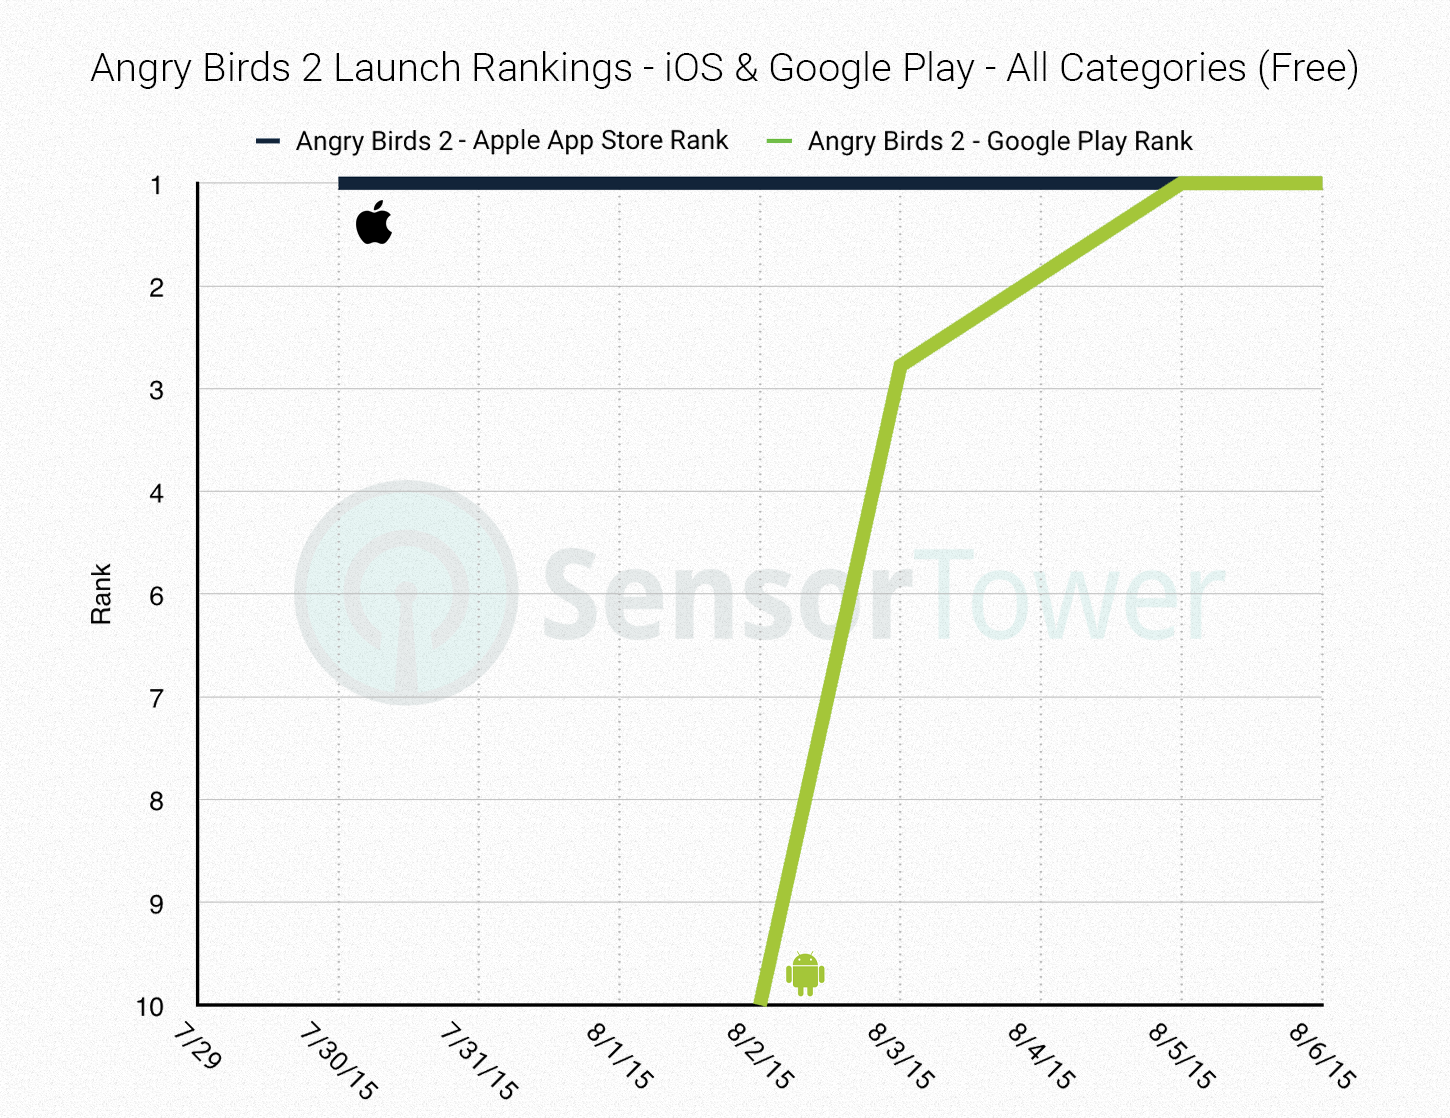 Angry Birds 2 Launch Rankings on iOS